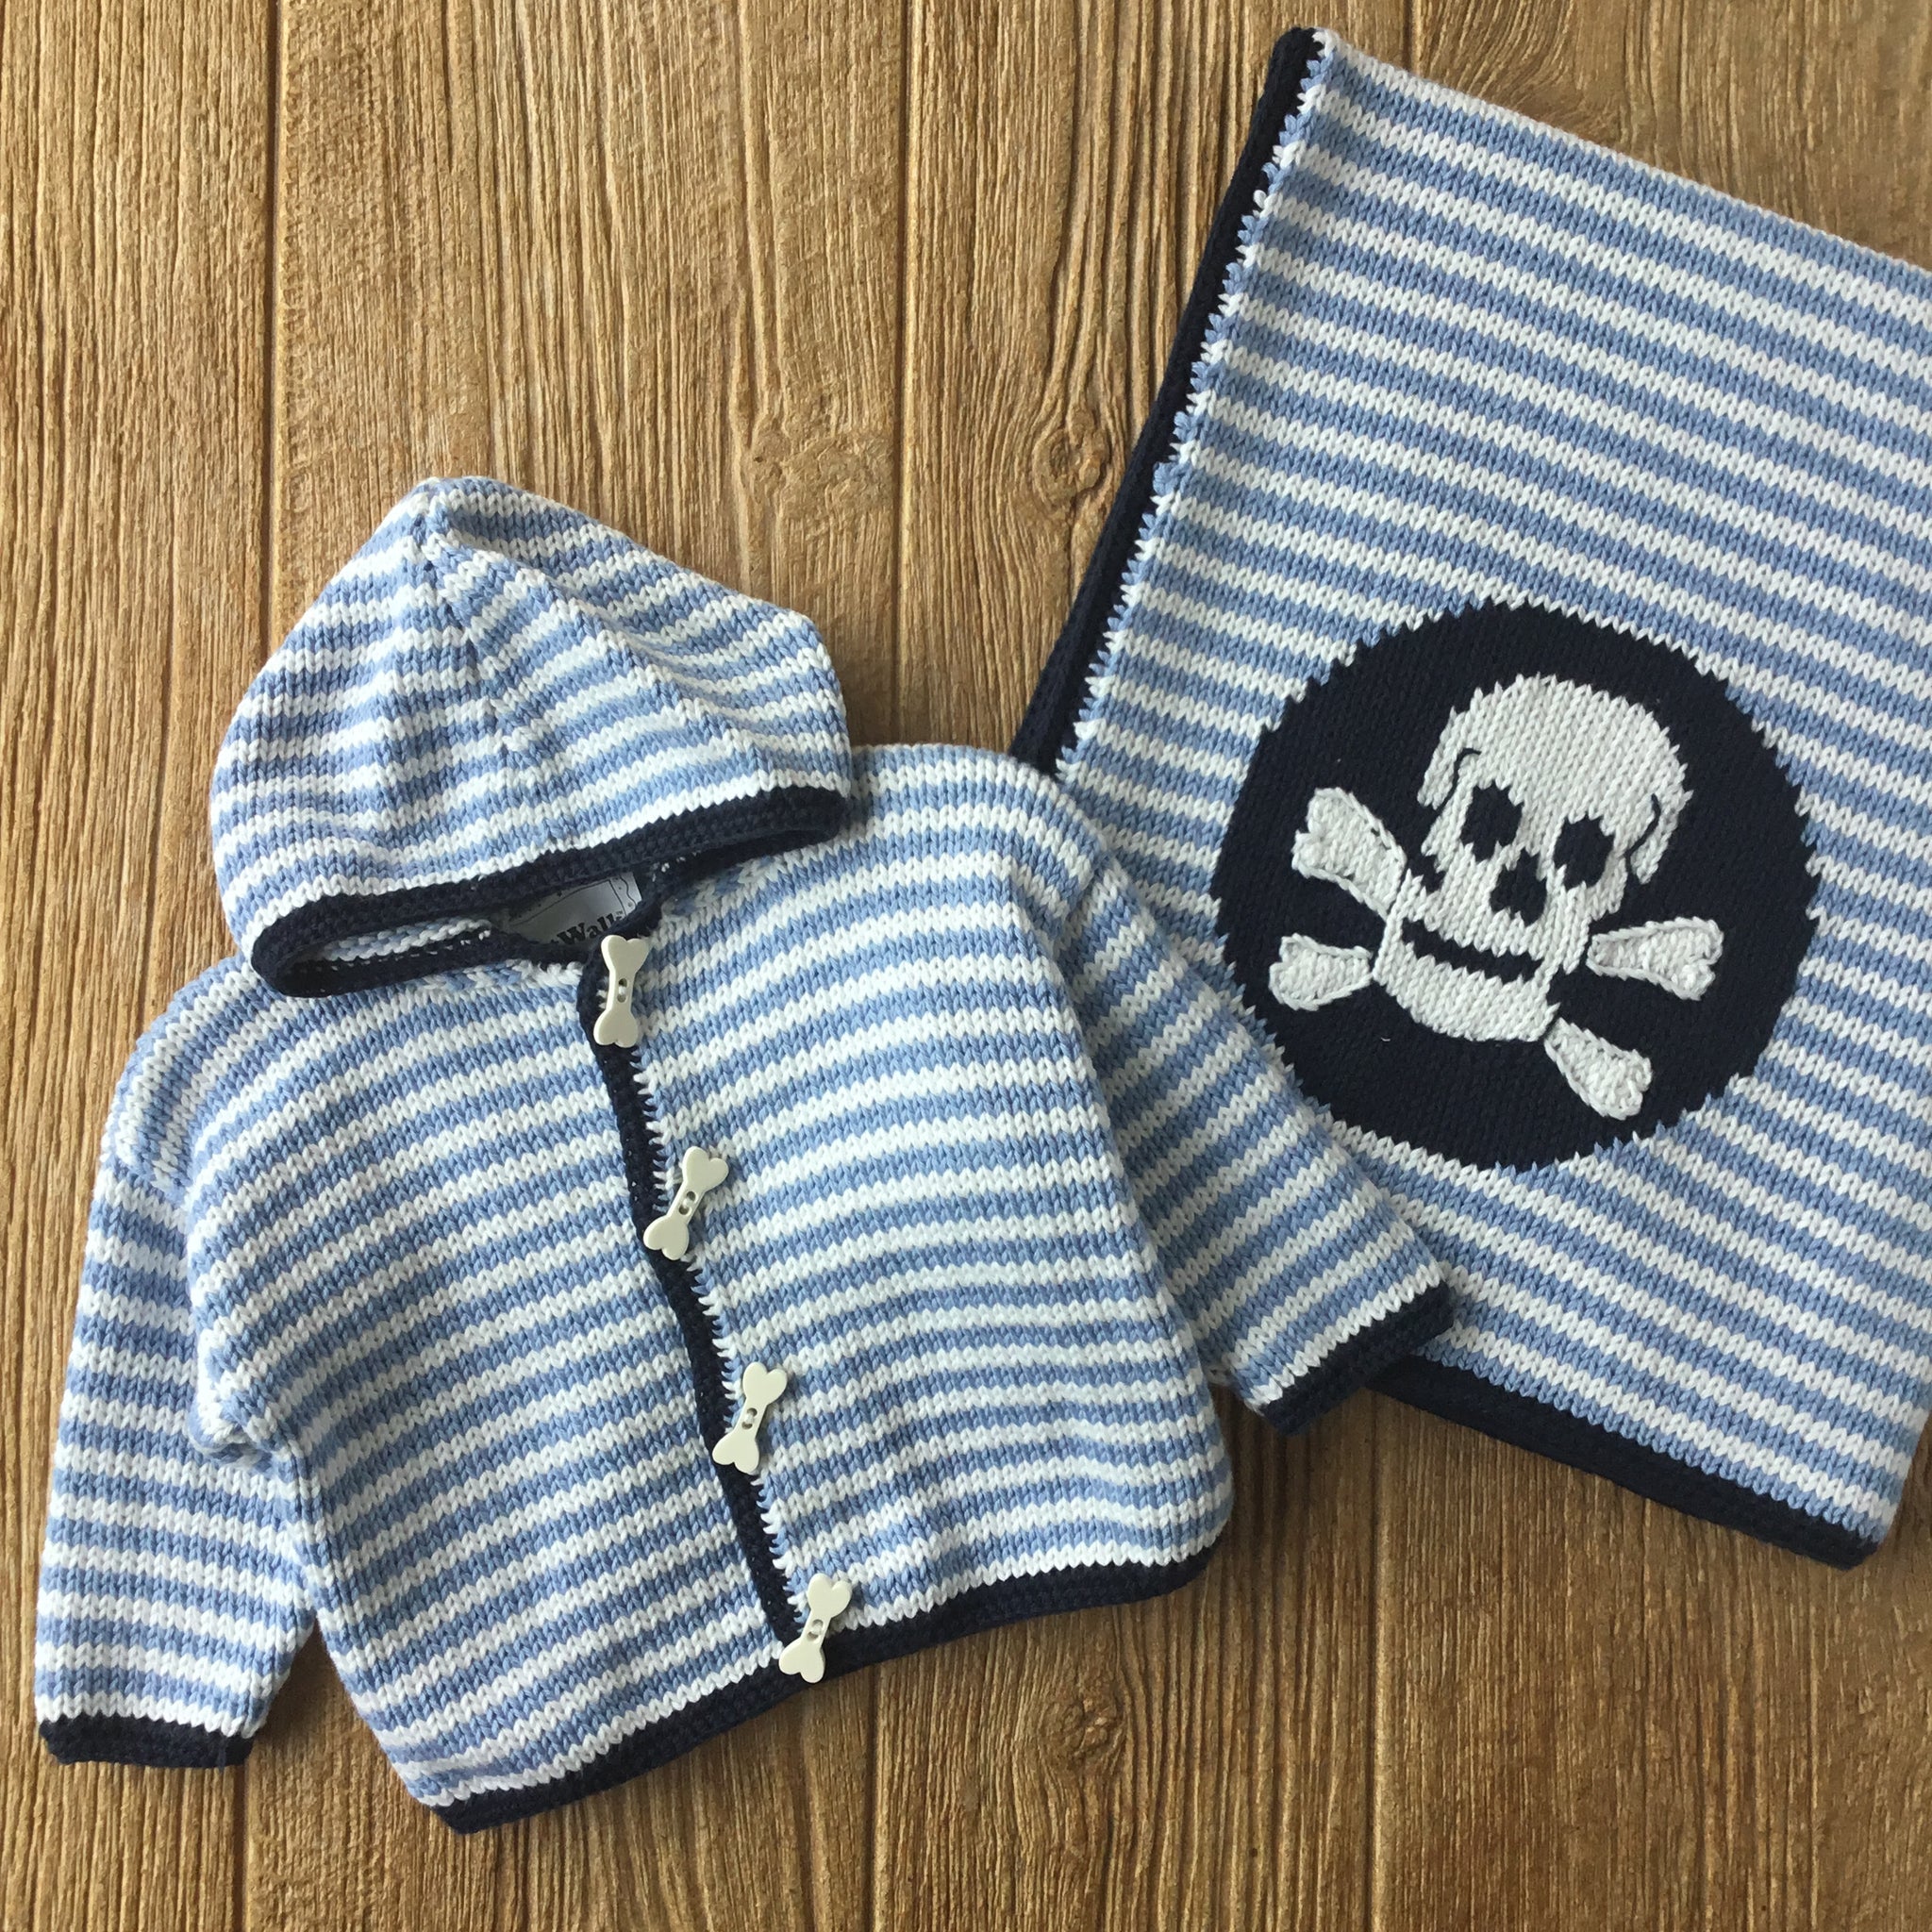 AW 371 Hooded Skull On Stripes Sweater